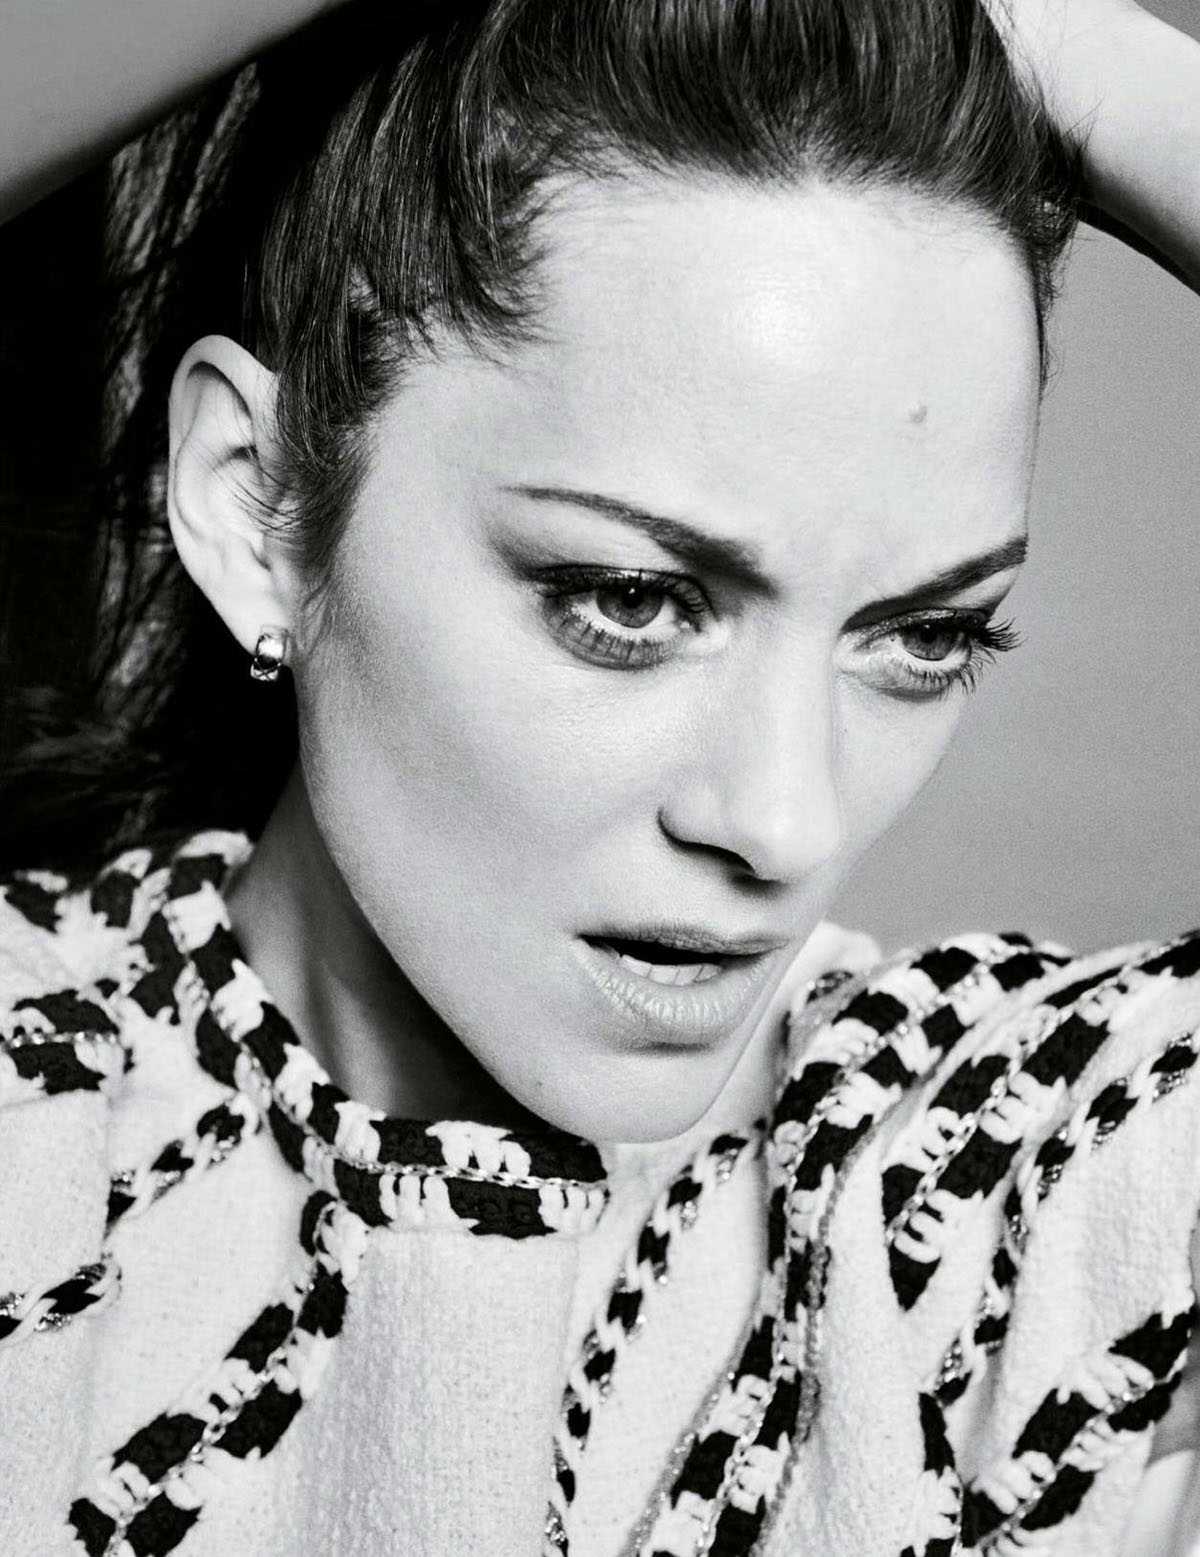 Marion Cotillard covers Elle France July 9th, 2021 by Jan Welters